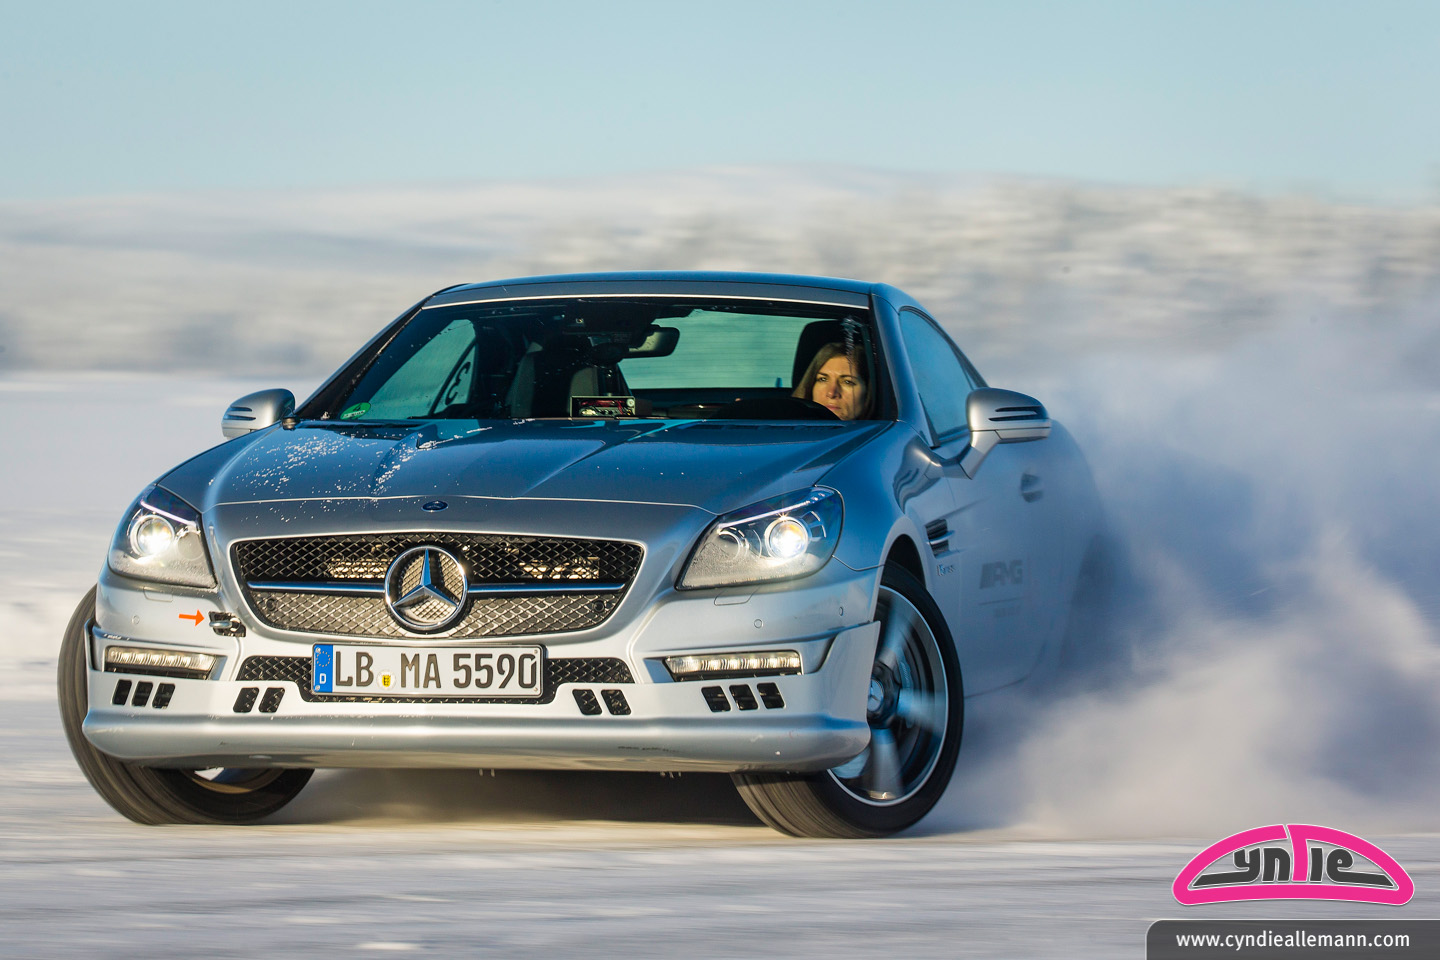 AMG Driving Academy: AMG Winter Sporting, Sweden